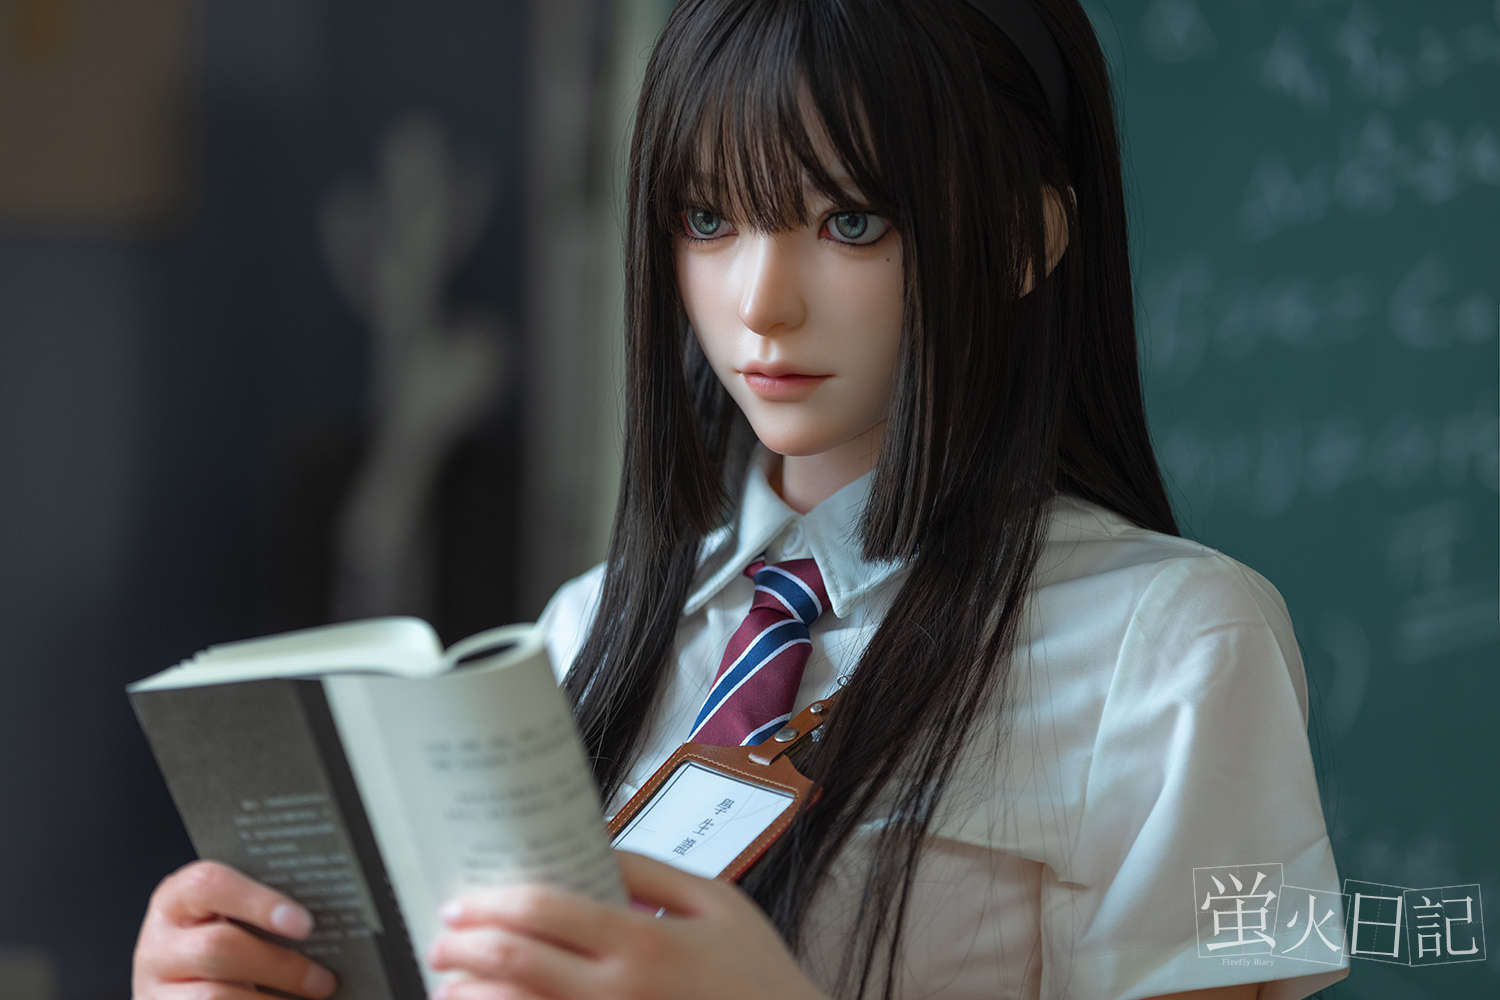 Firefly Diary Doll 162 cm Silicone - Tian Cheng